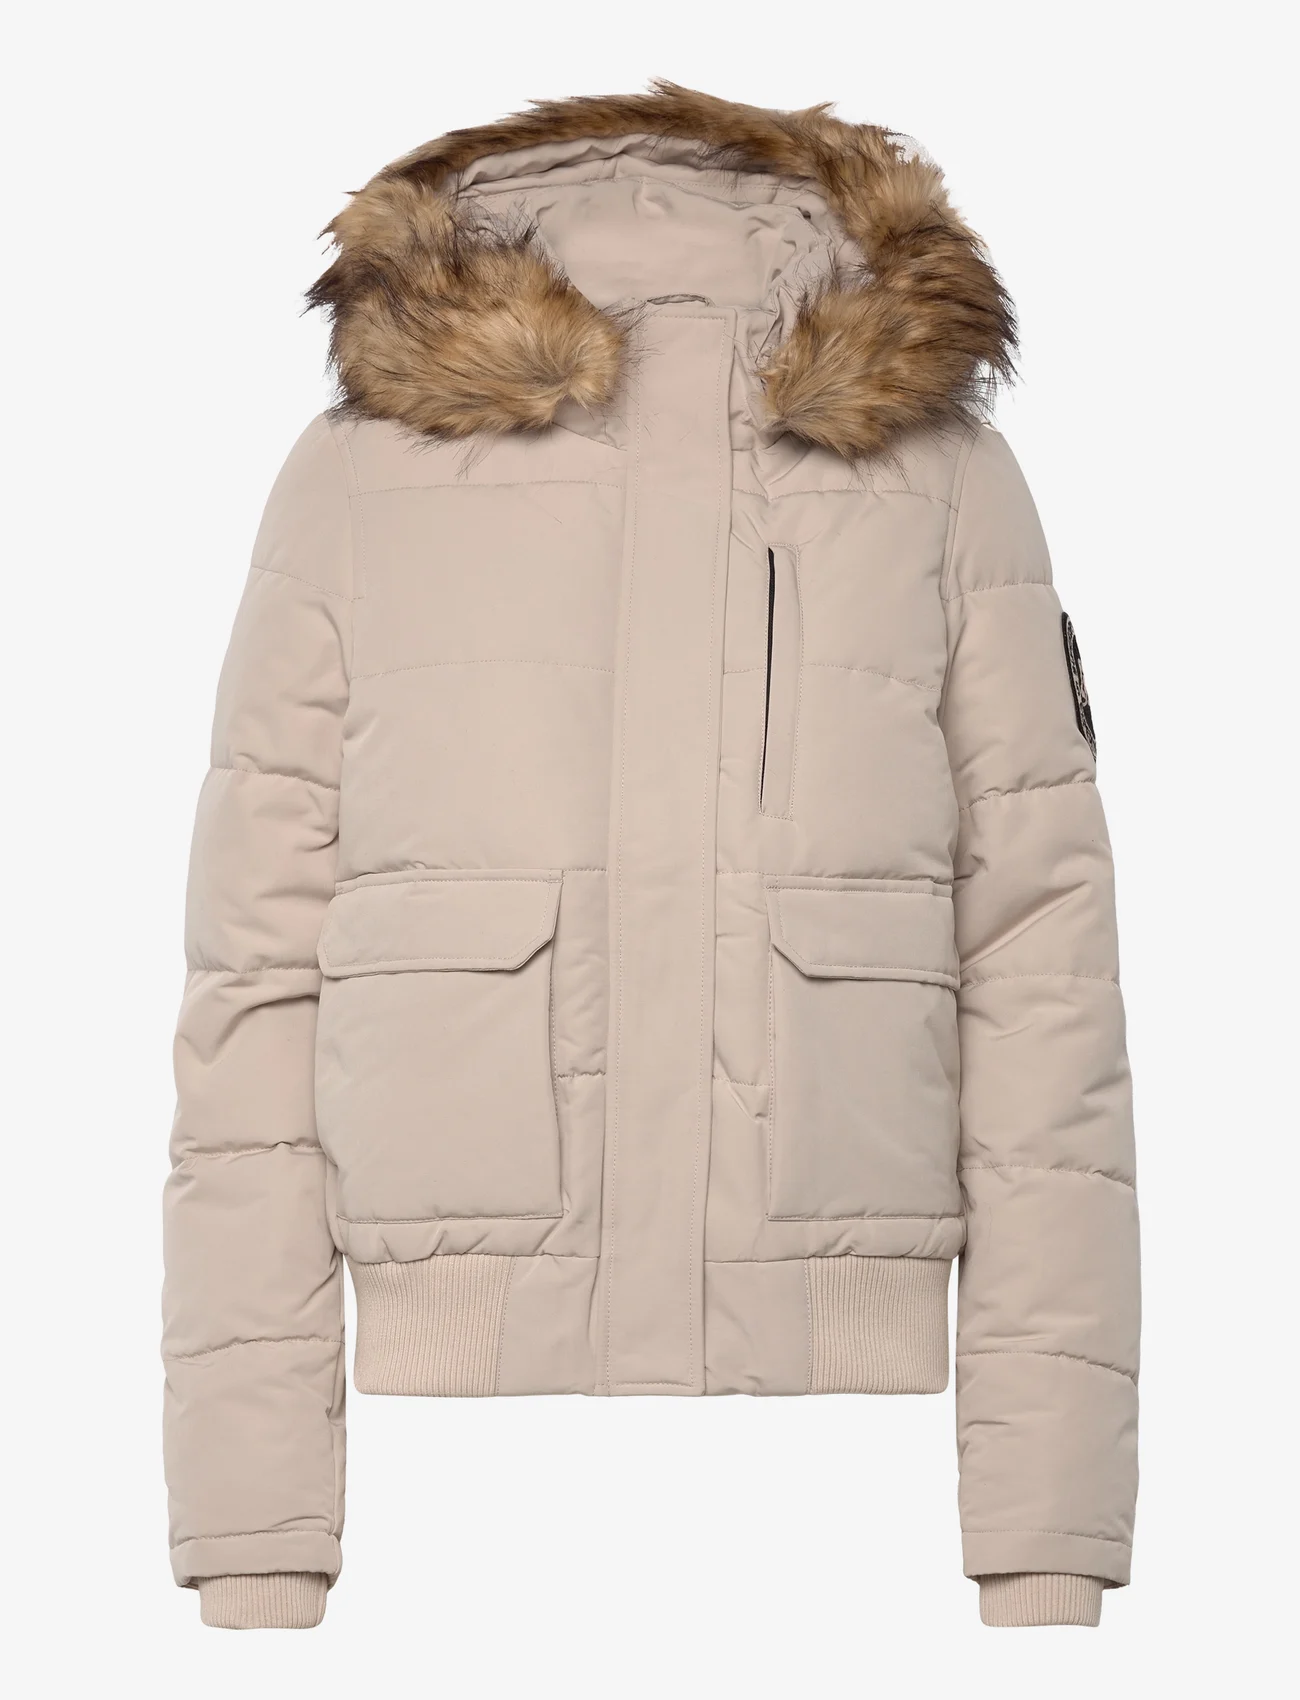 Superdry - EVEREST HOODED PUFFER BOMBER - spring jackets - chateau grey - 0